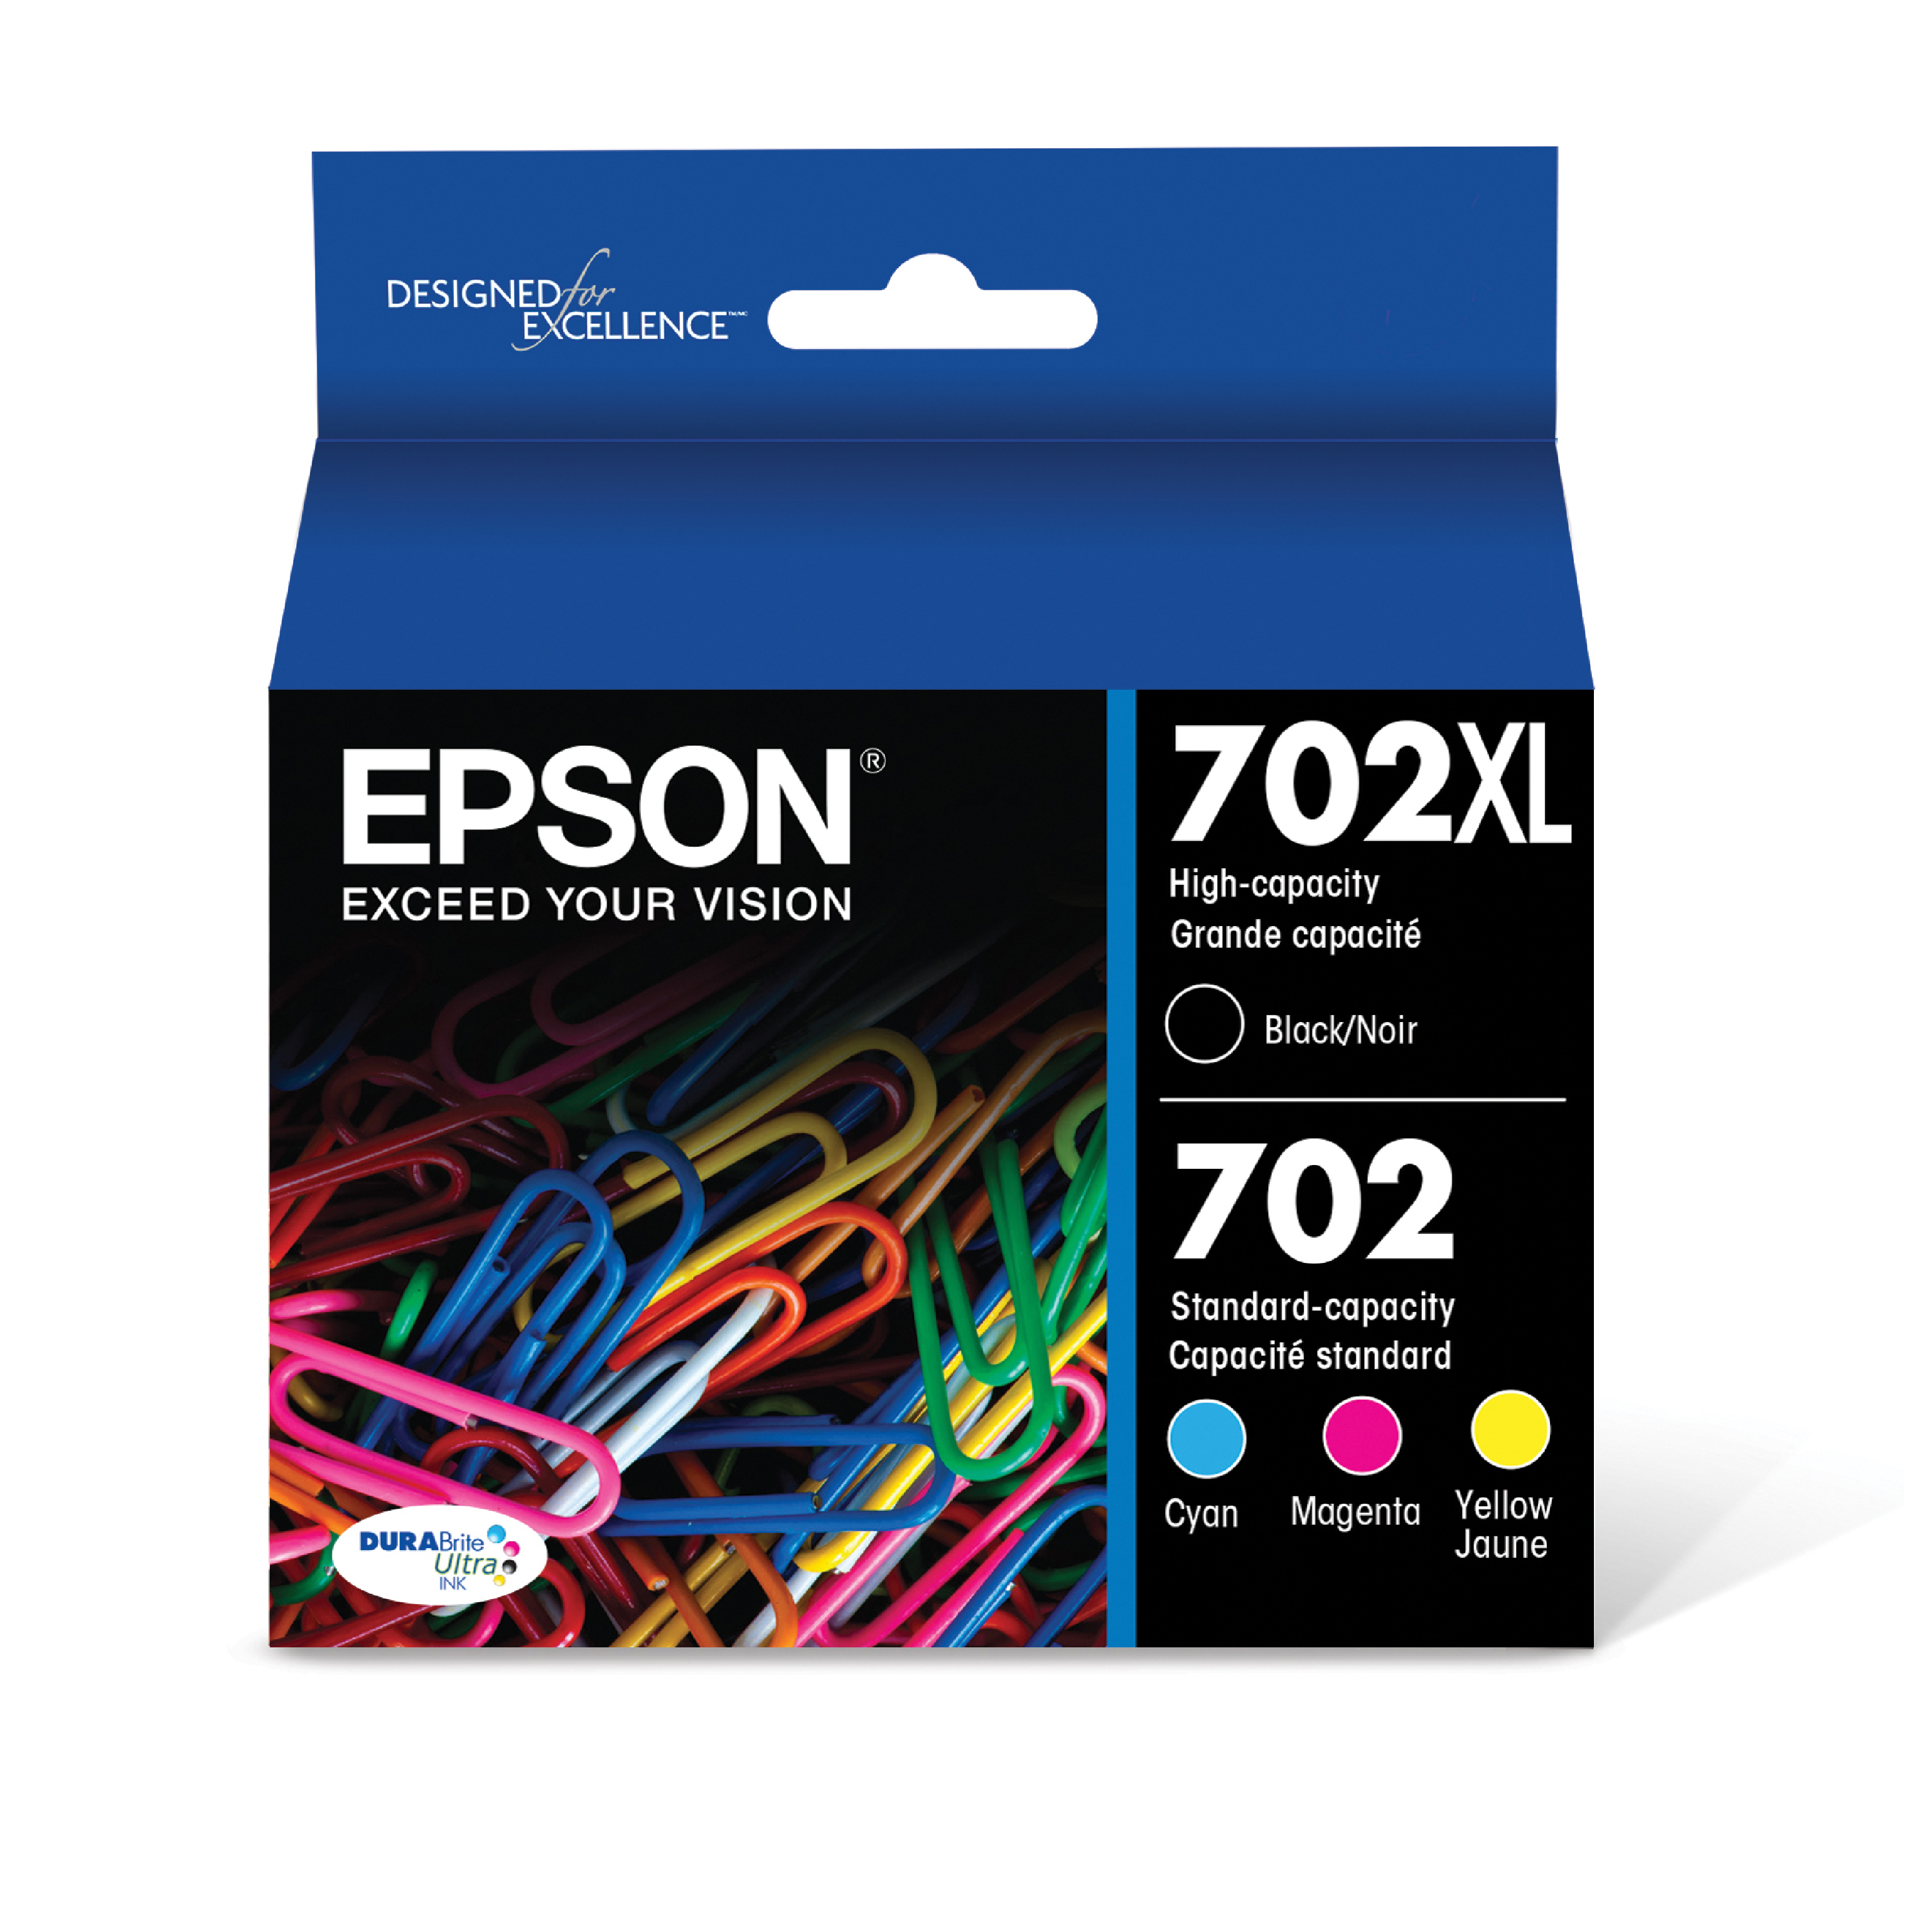 EPSON 702 DURABrite Ultra Ink High Capacity Black & Standard Color Cartridge Combo Pack (T702XL-BCS) Works with WorkForce Pro WF-3720, WF-3730, WF-3733 - image 1 of 5